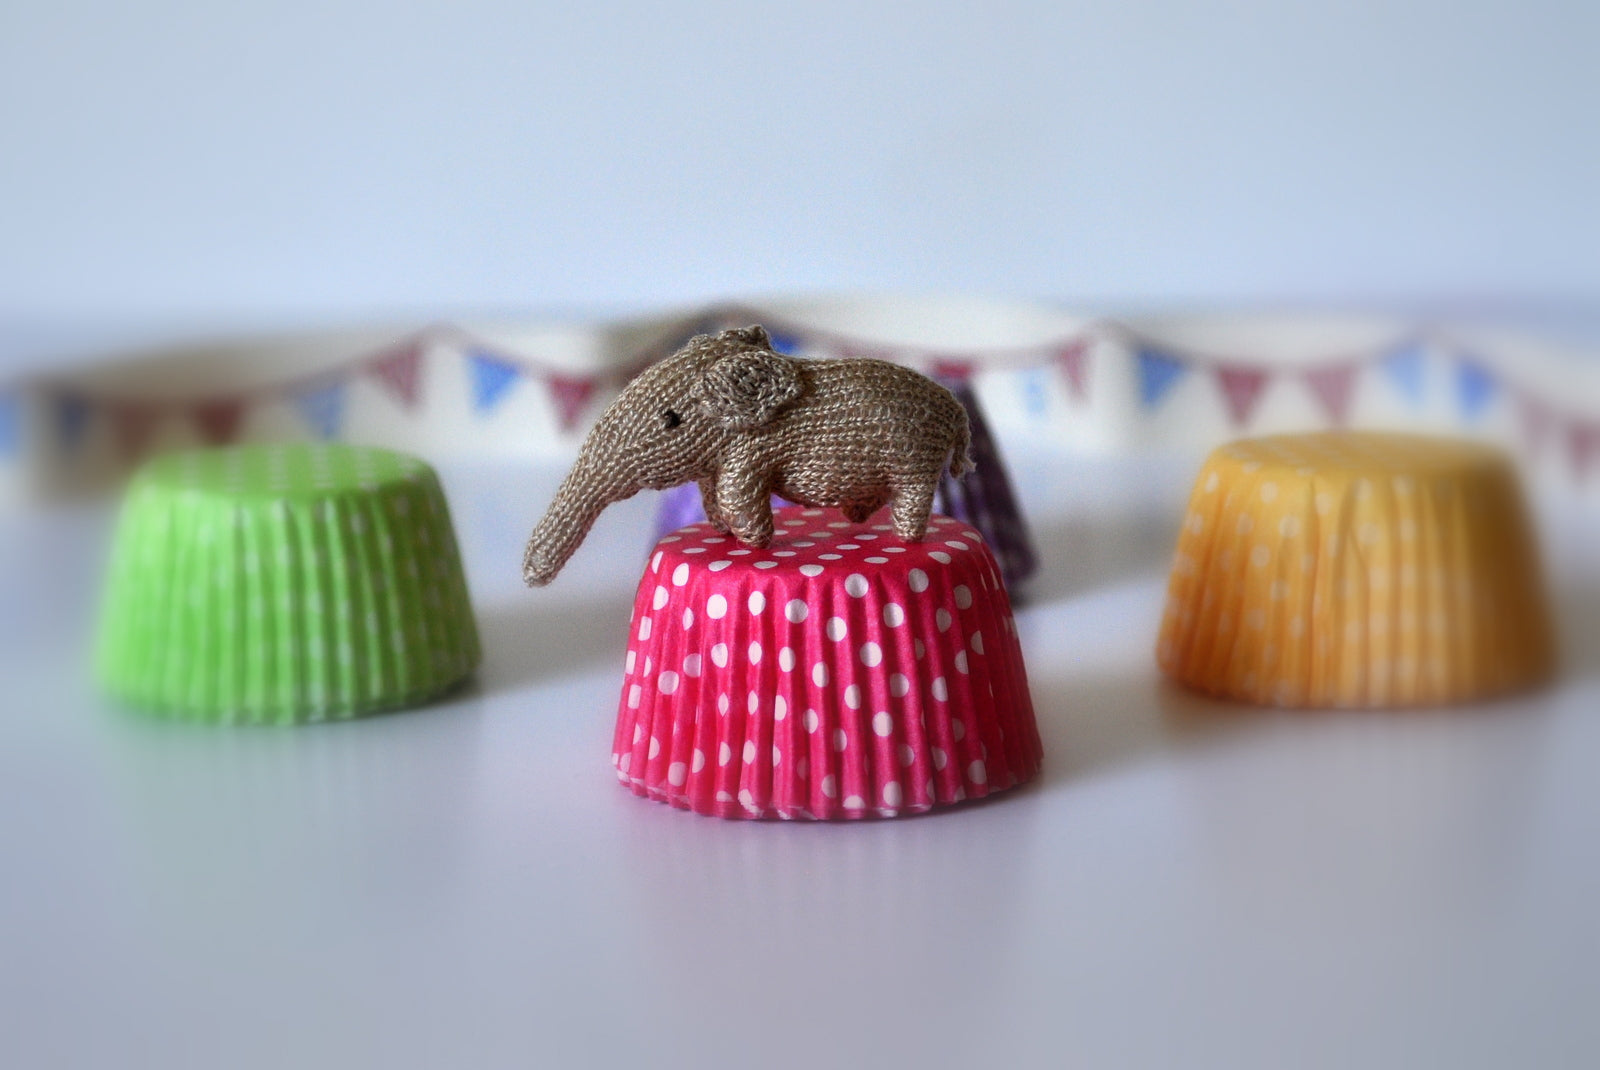 Circus Elephant Soft Toy #2 by Jenny Tomkins